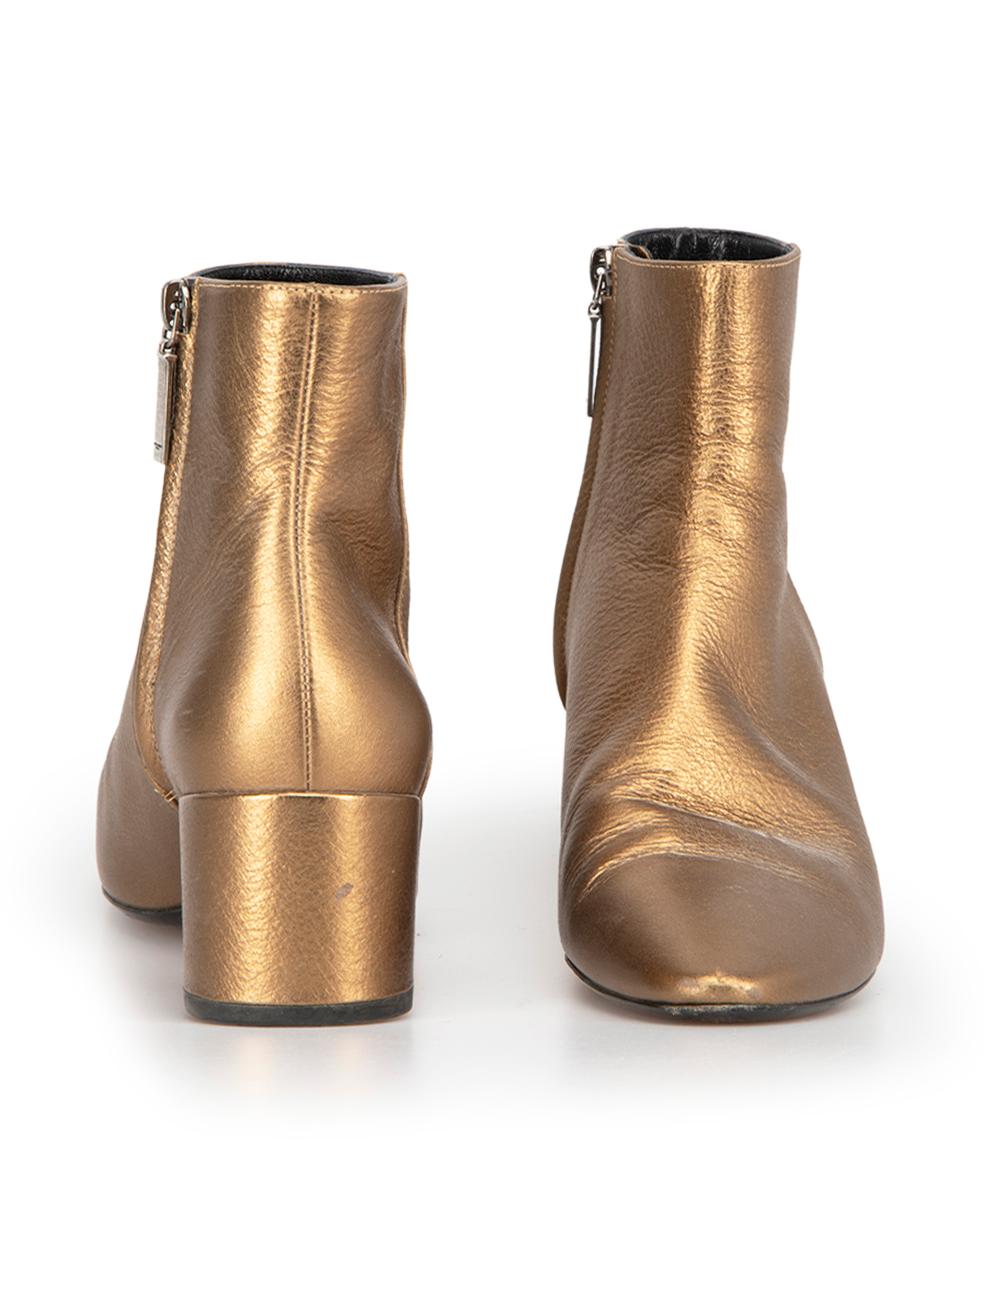 Saint Laurent Women's Gold Leather Pointed Toe Metallic Ankle Boots In Good Condition For Sale In London, GB